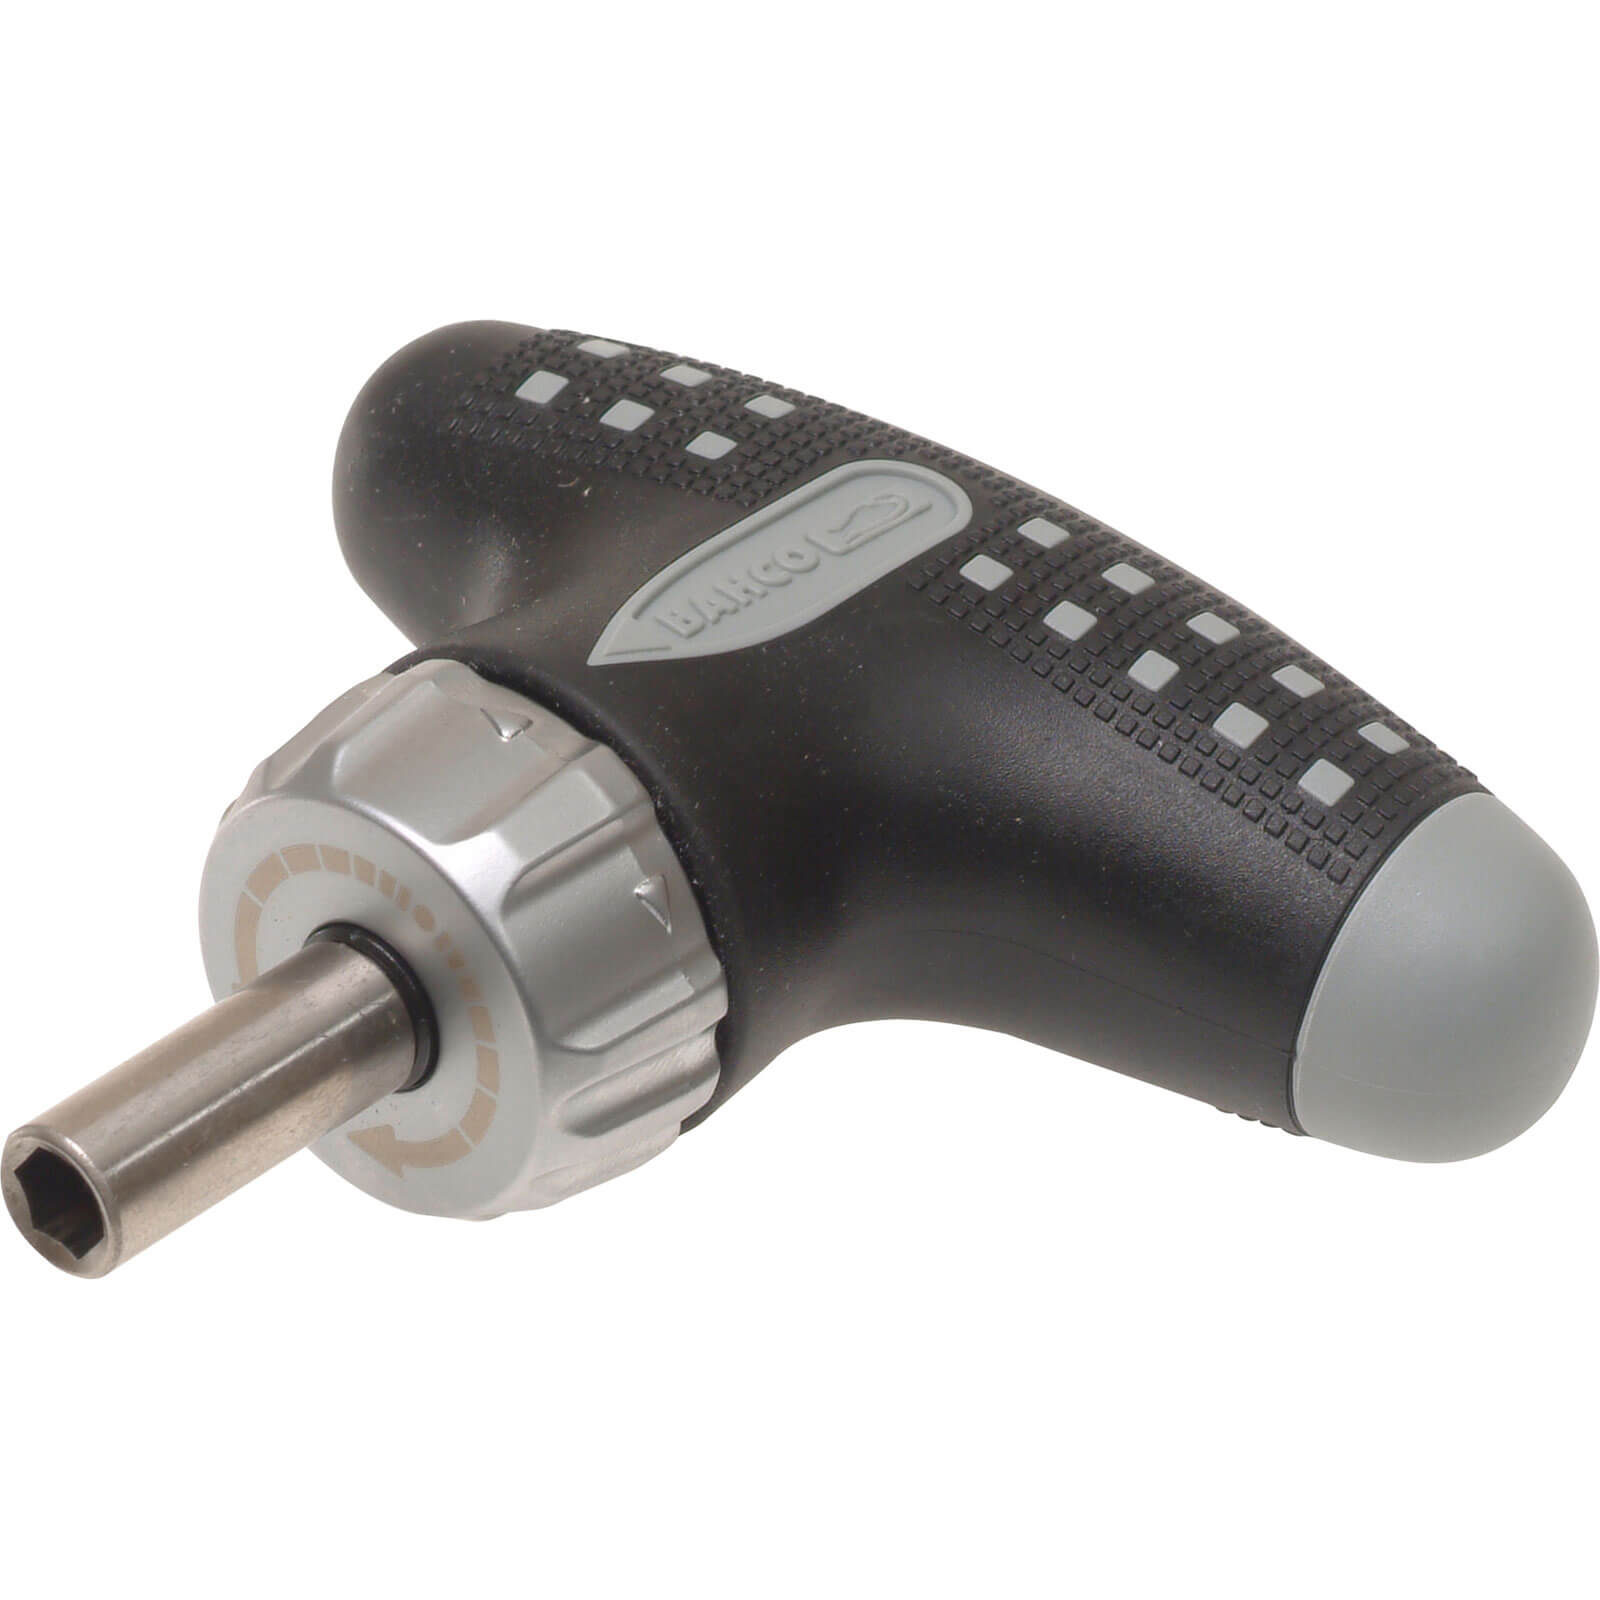 Image of Bahco Stubby Ratchet T Handle Screwdriver